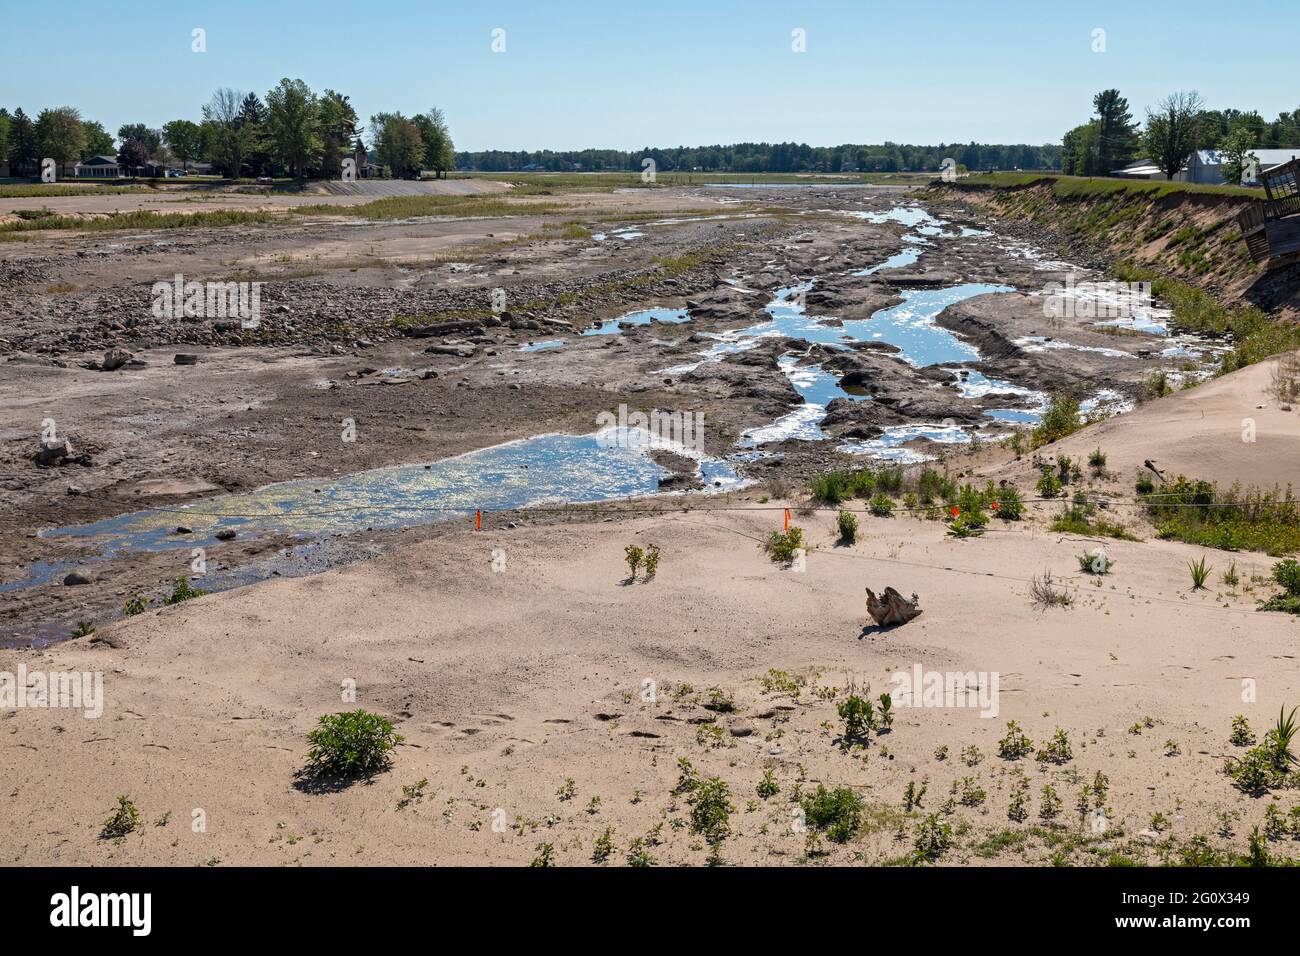 Edenville, Michigan - The aftermath of 2020 flooding on the Tittabawassee River, which breached poorly-maintained dams and drained Sanford and Wixom L Stock Photo